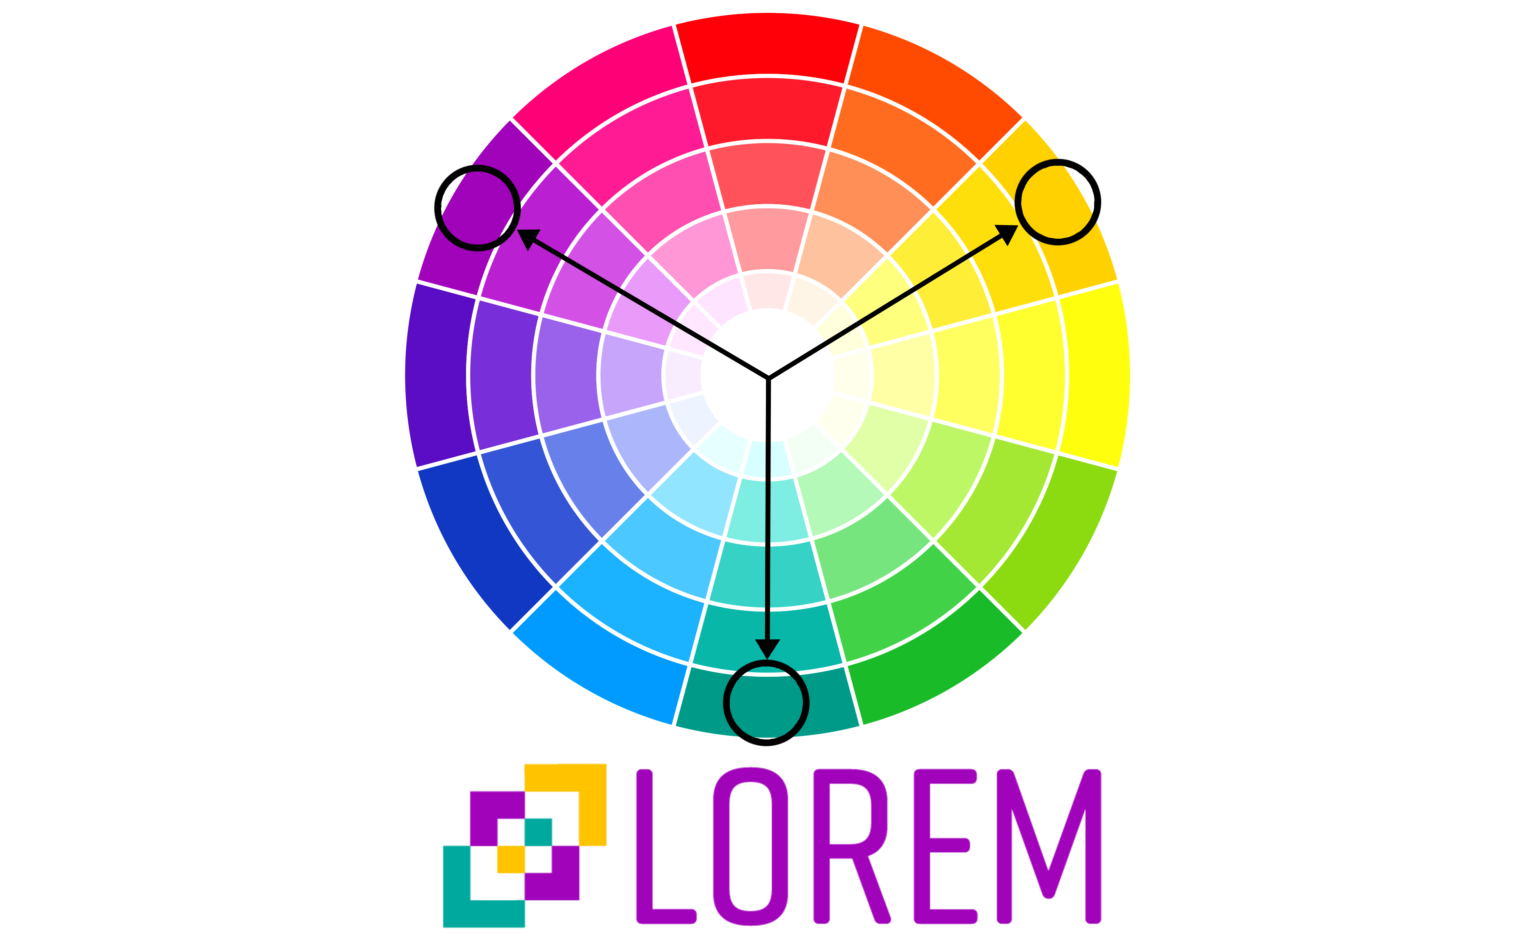 POD Print Using Color Schemes in Your Logo